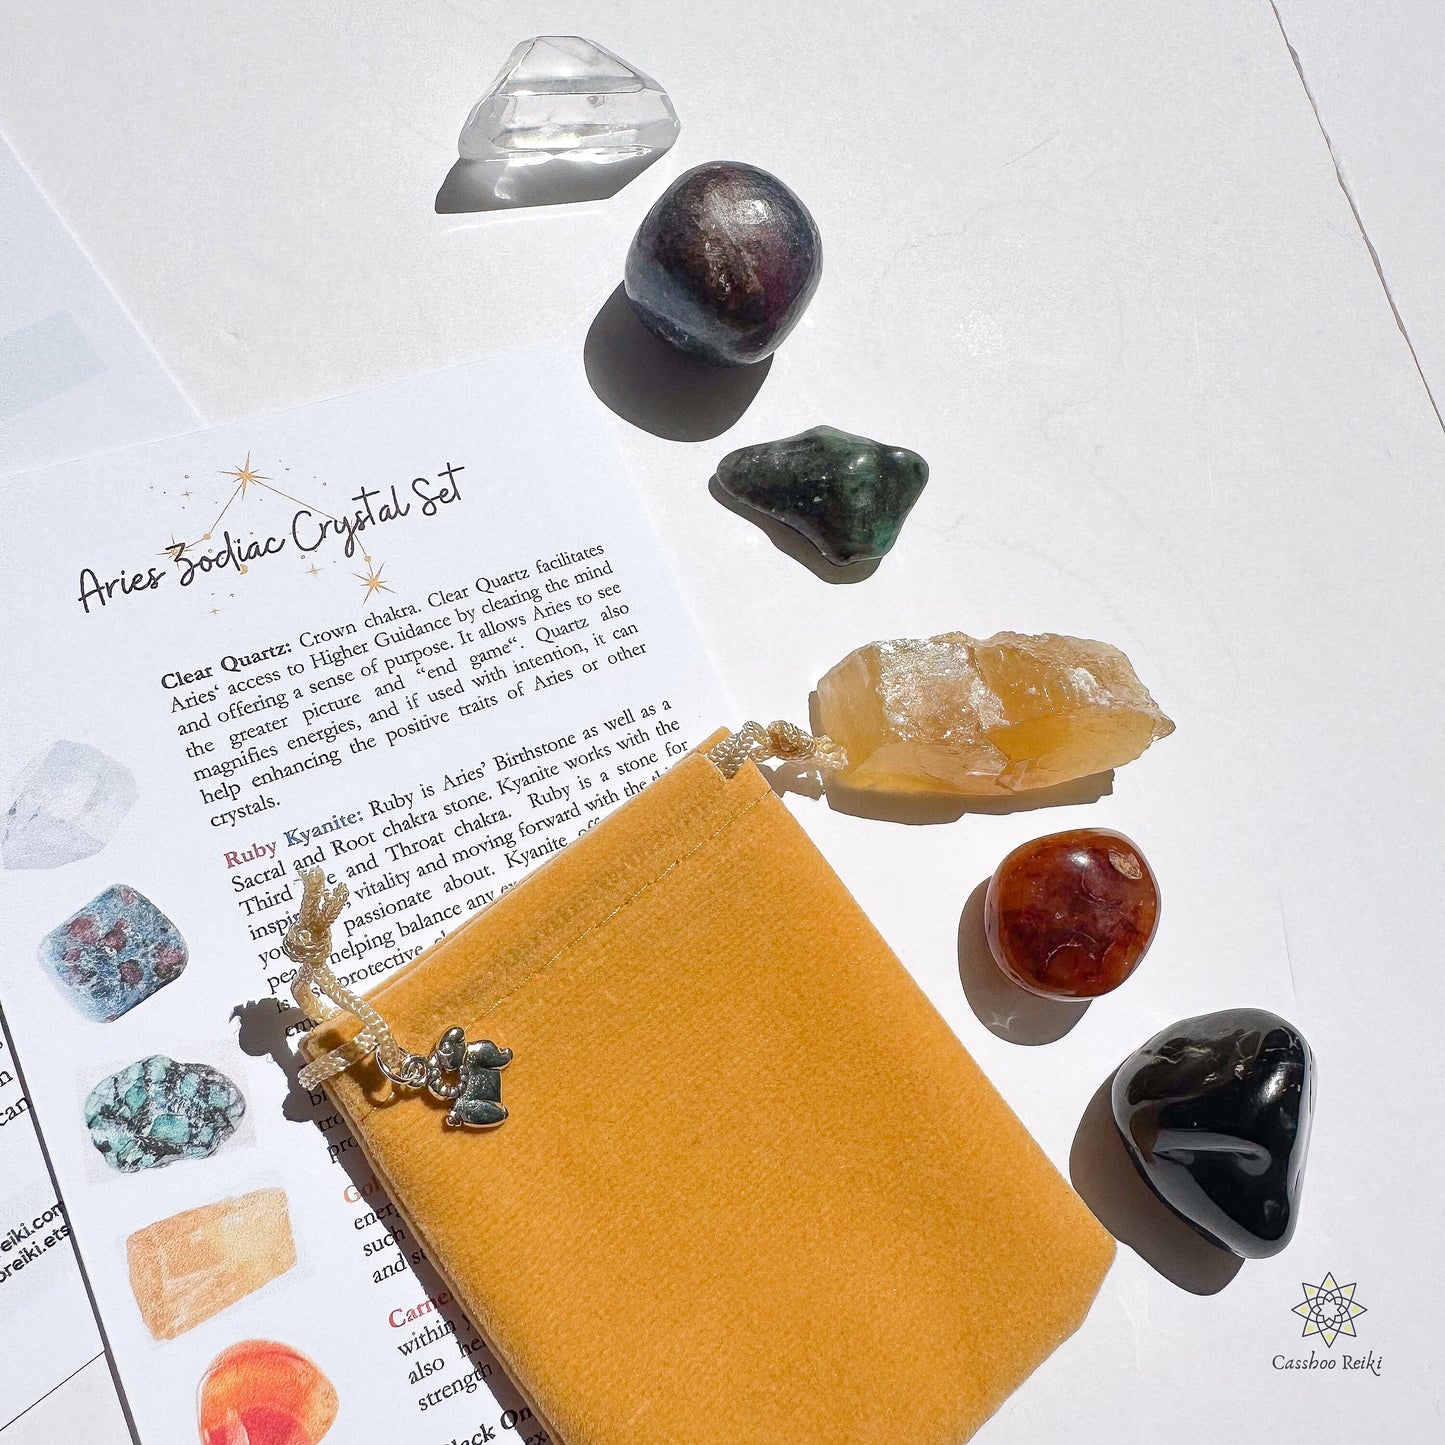 6 Crystal Set for Aries Zodiac | March-April Birthday Gift | Zodiac Sign Gift